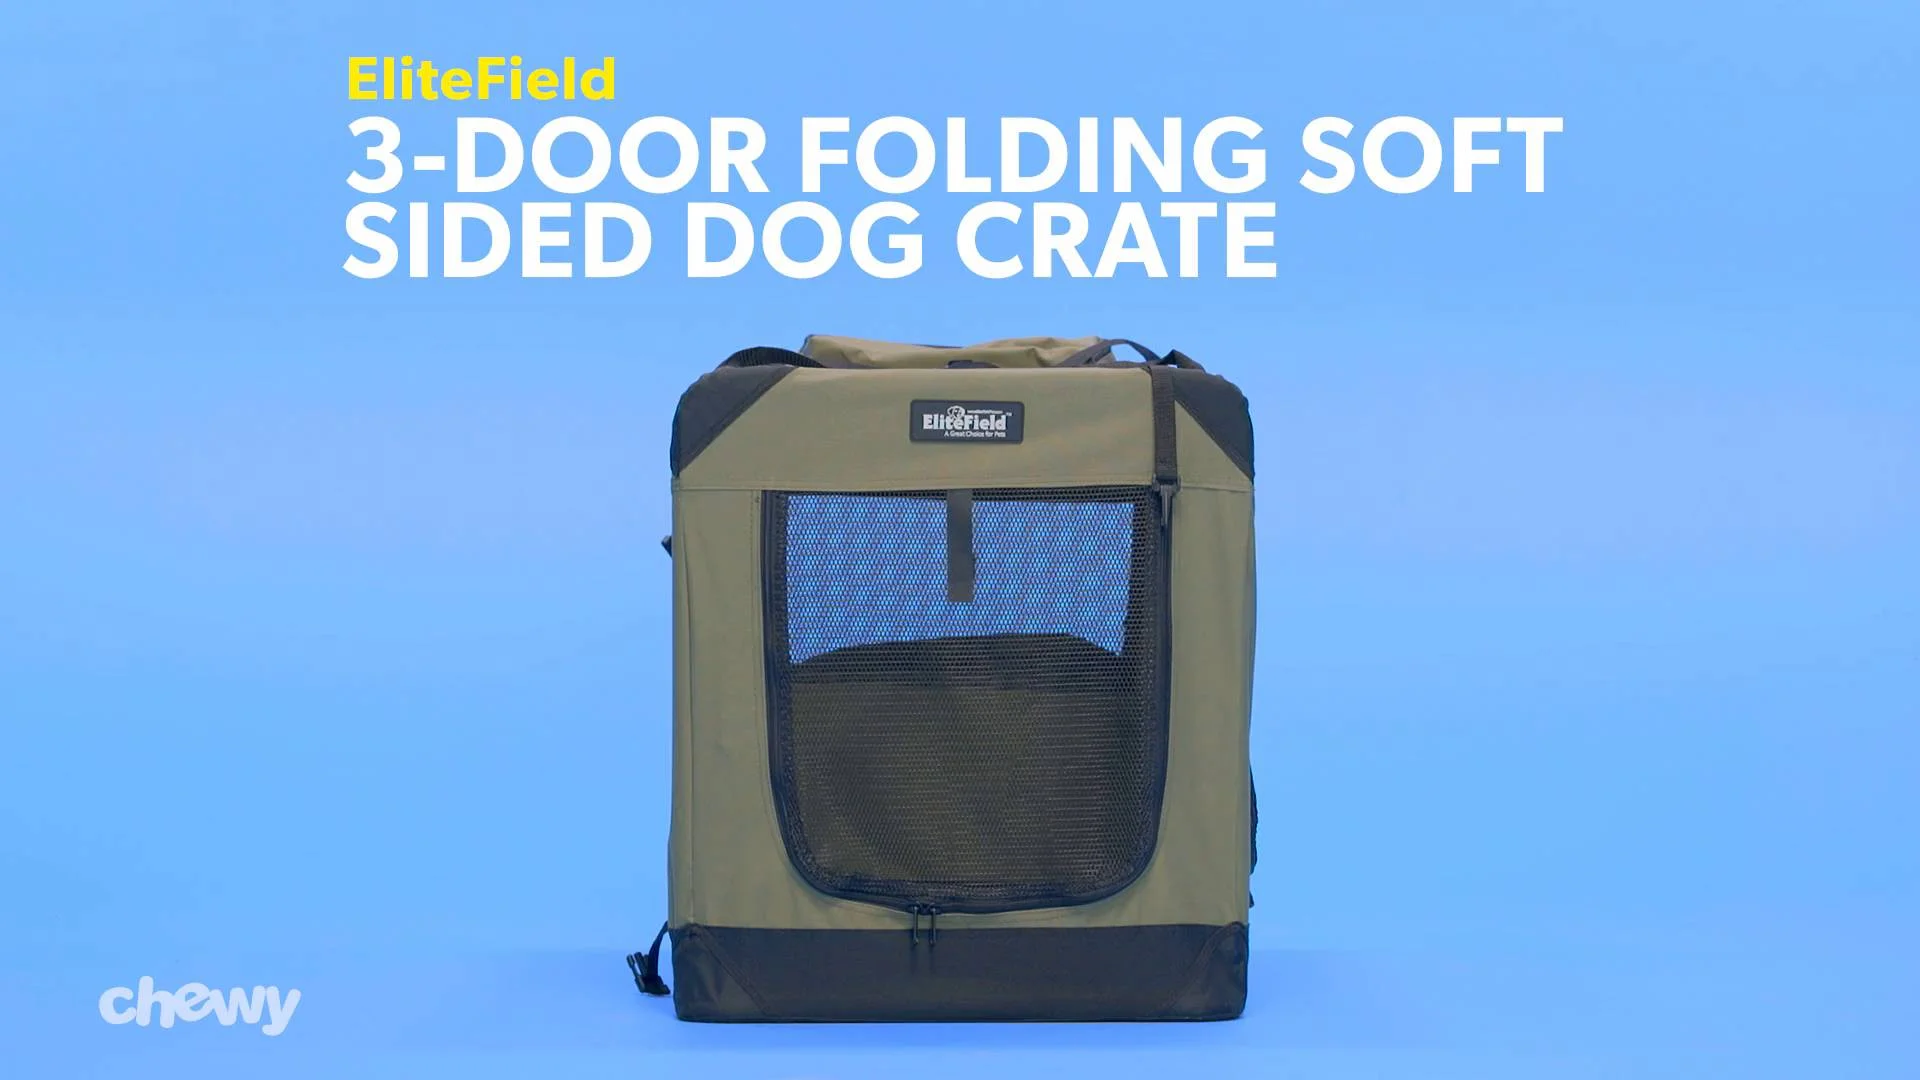 elitefield soft crate